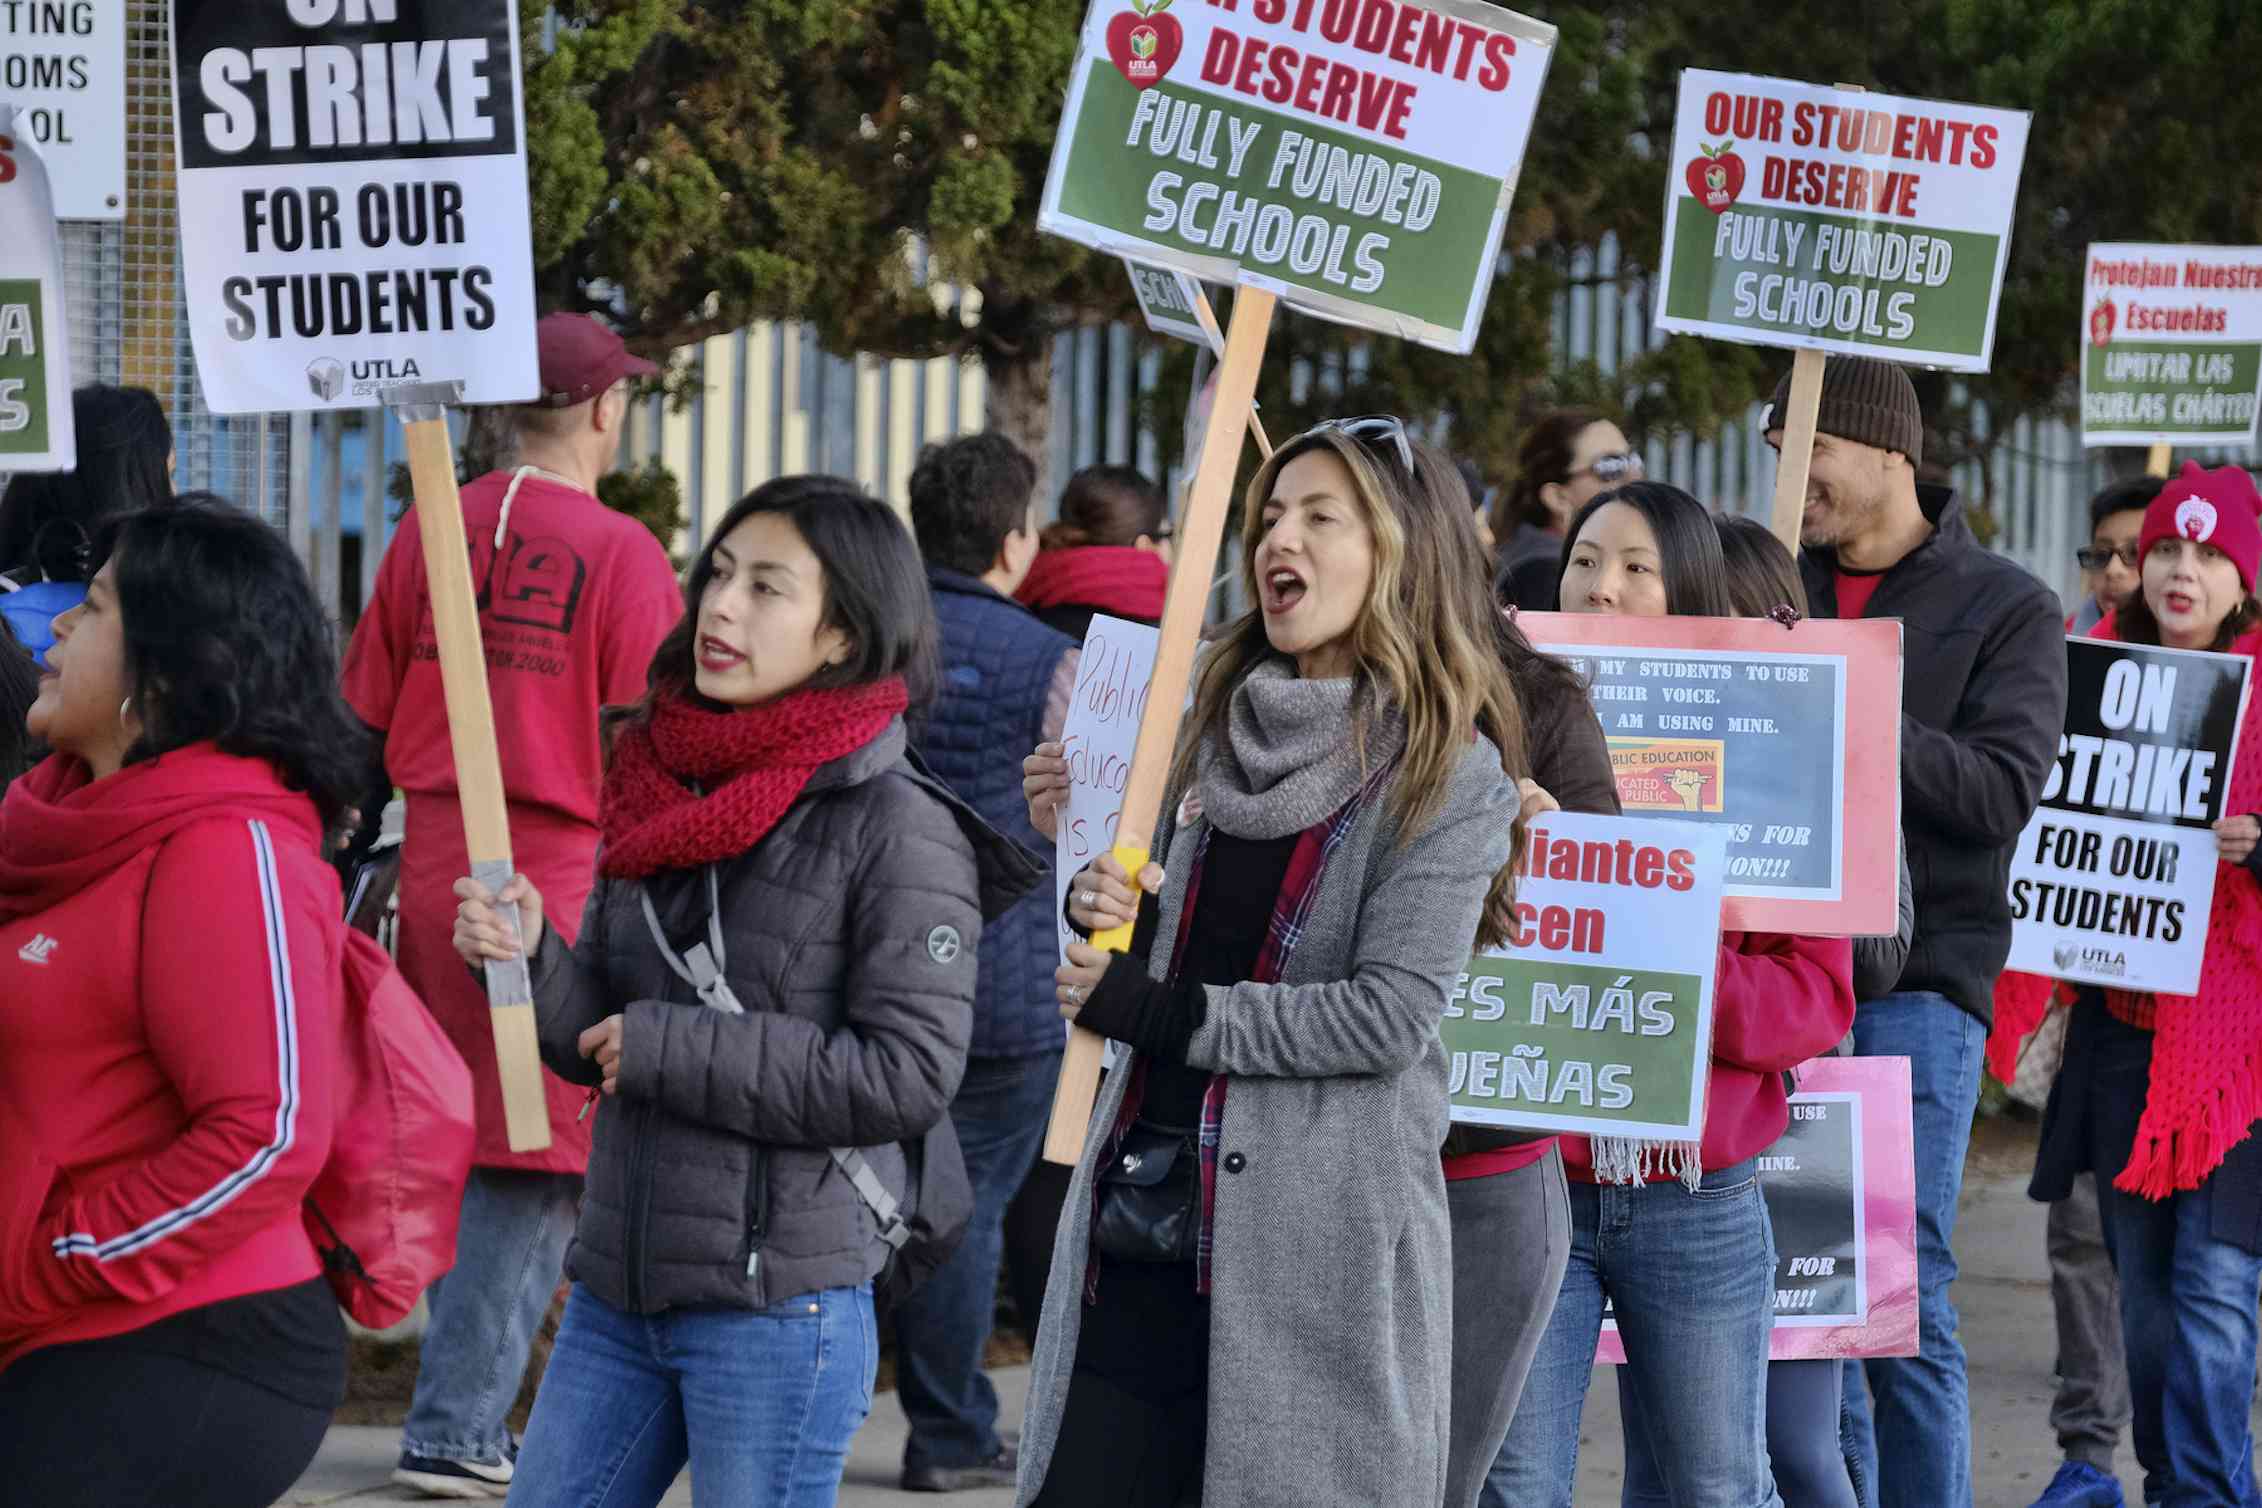 Teacher unions say they're fighting for students and schools what they really want is more members